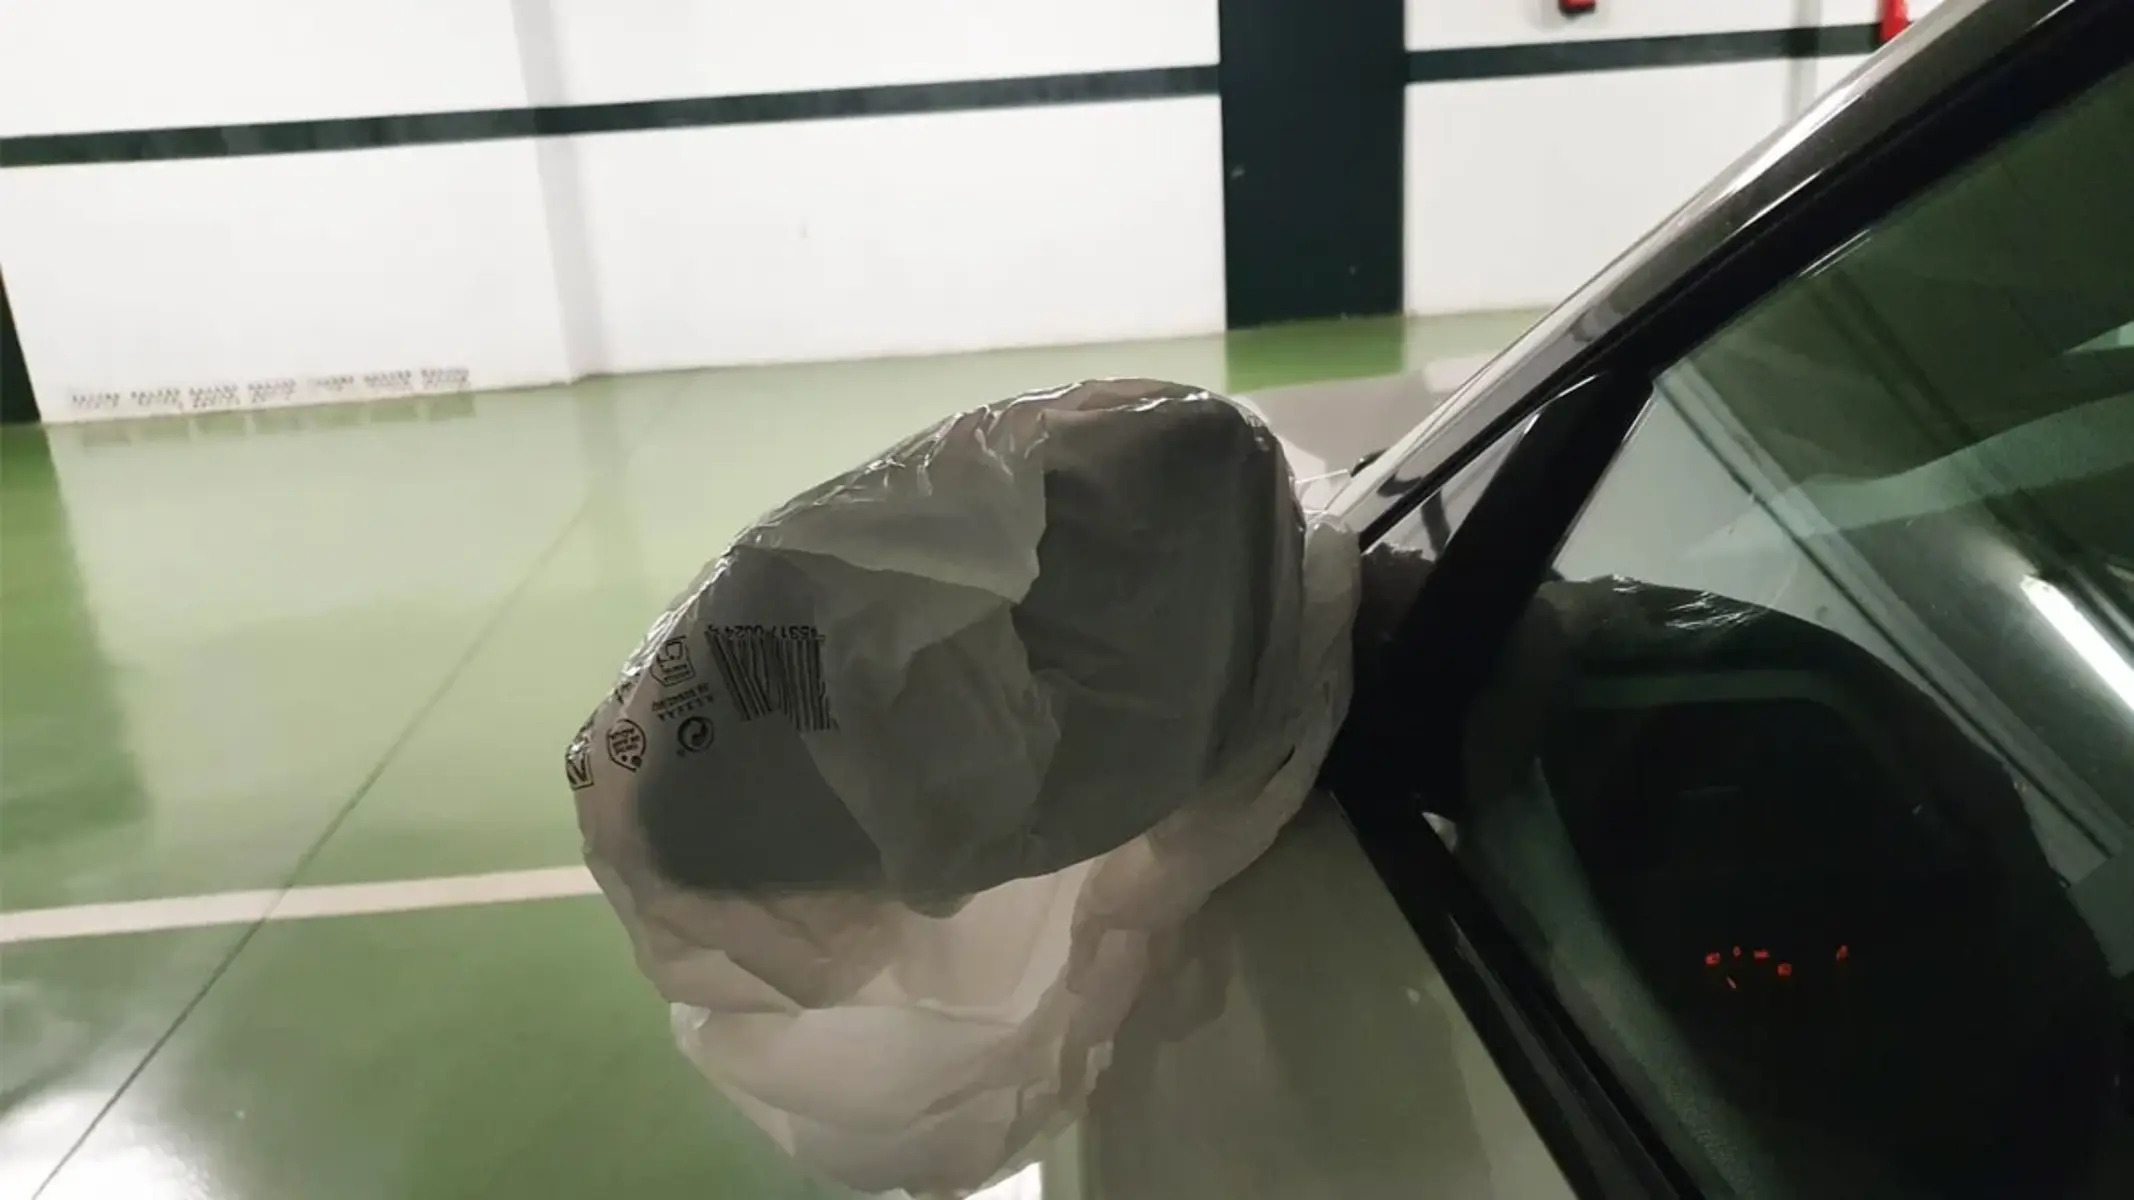 Why Put A Plastic Bag On Your Car Mirror